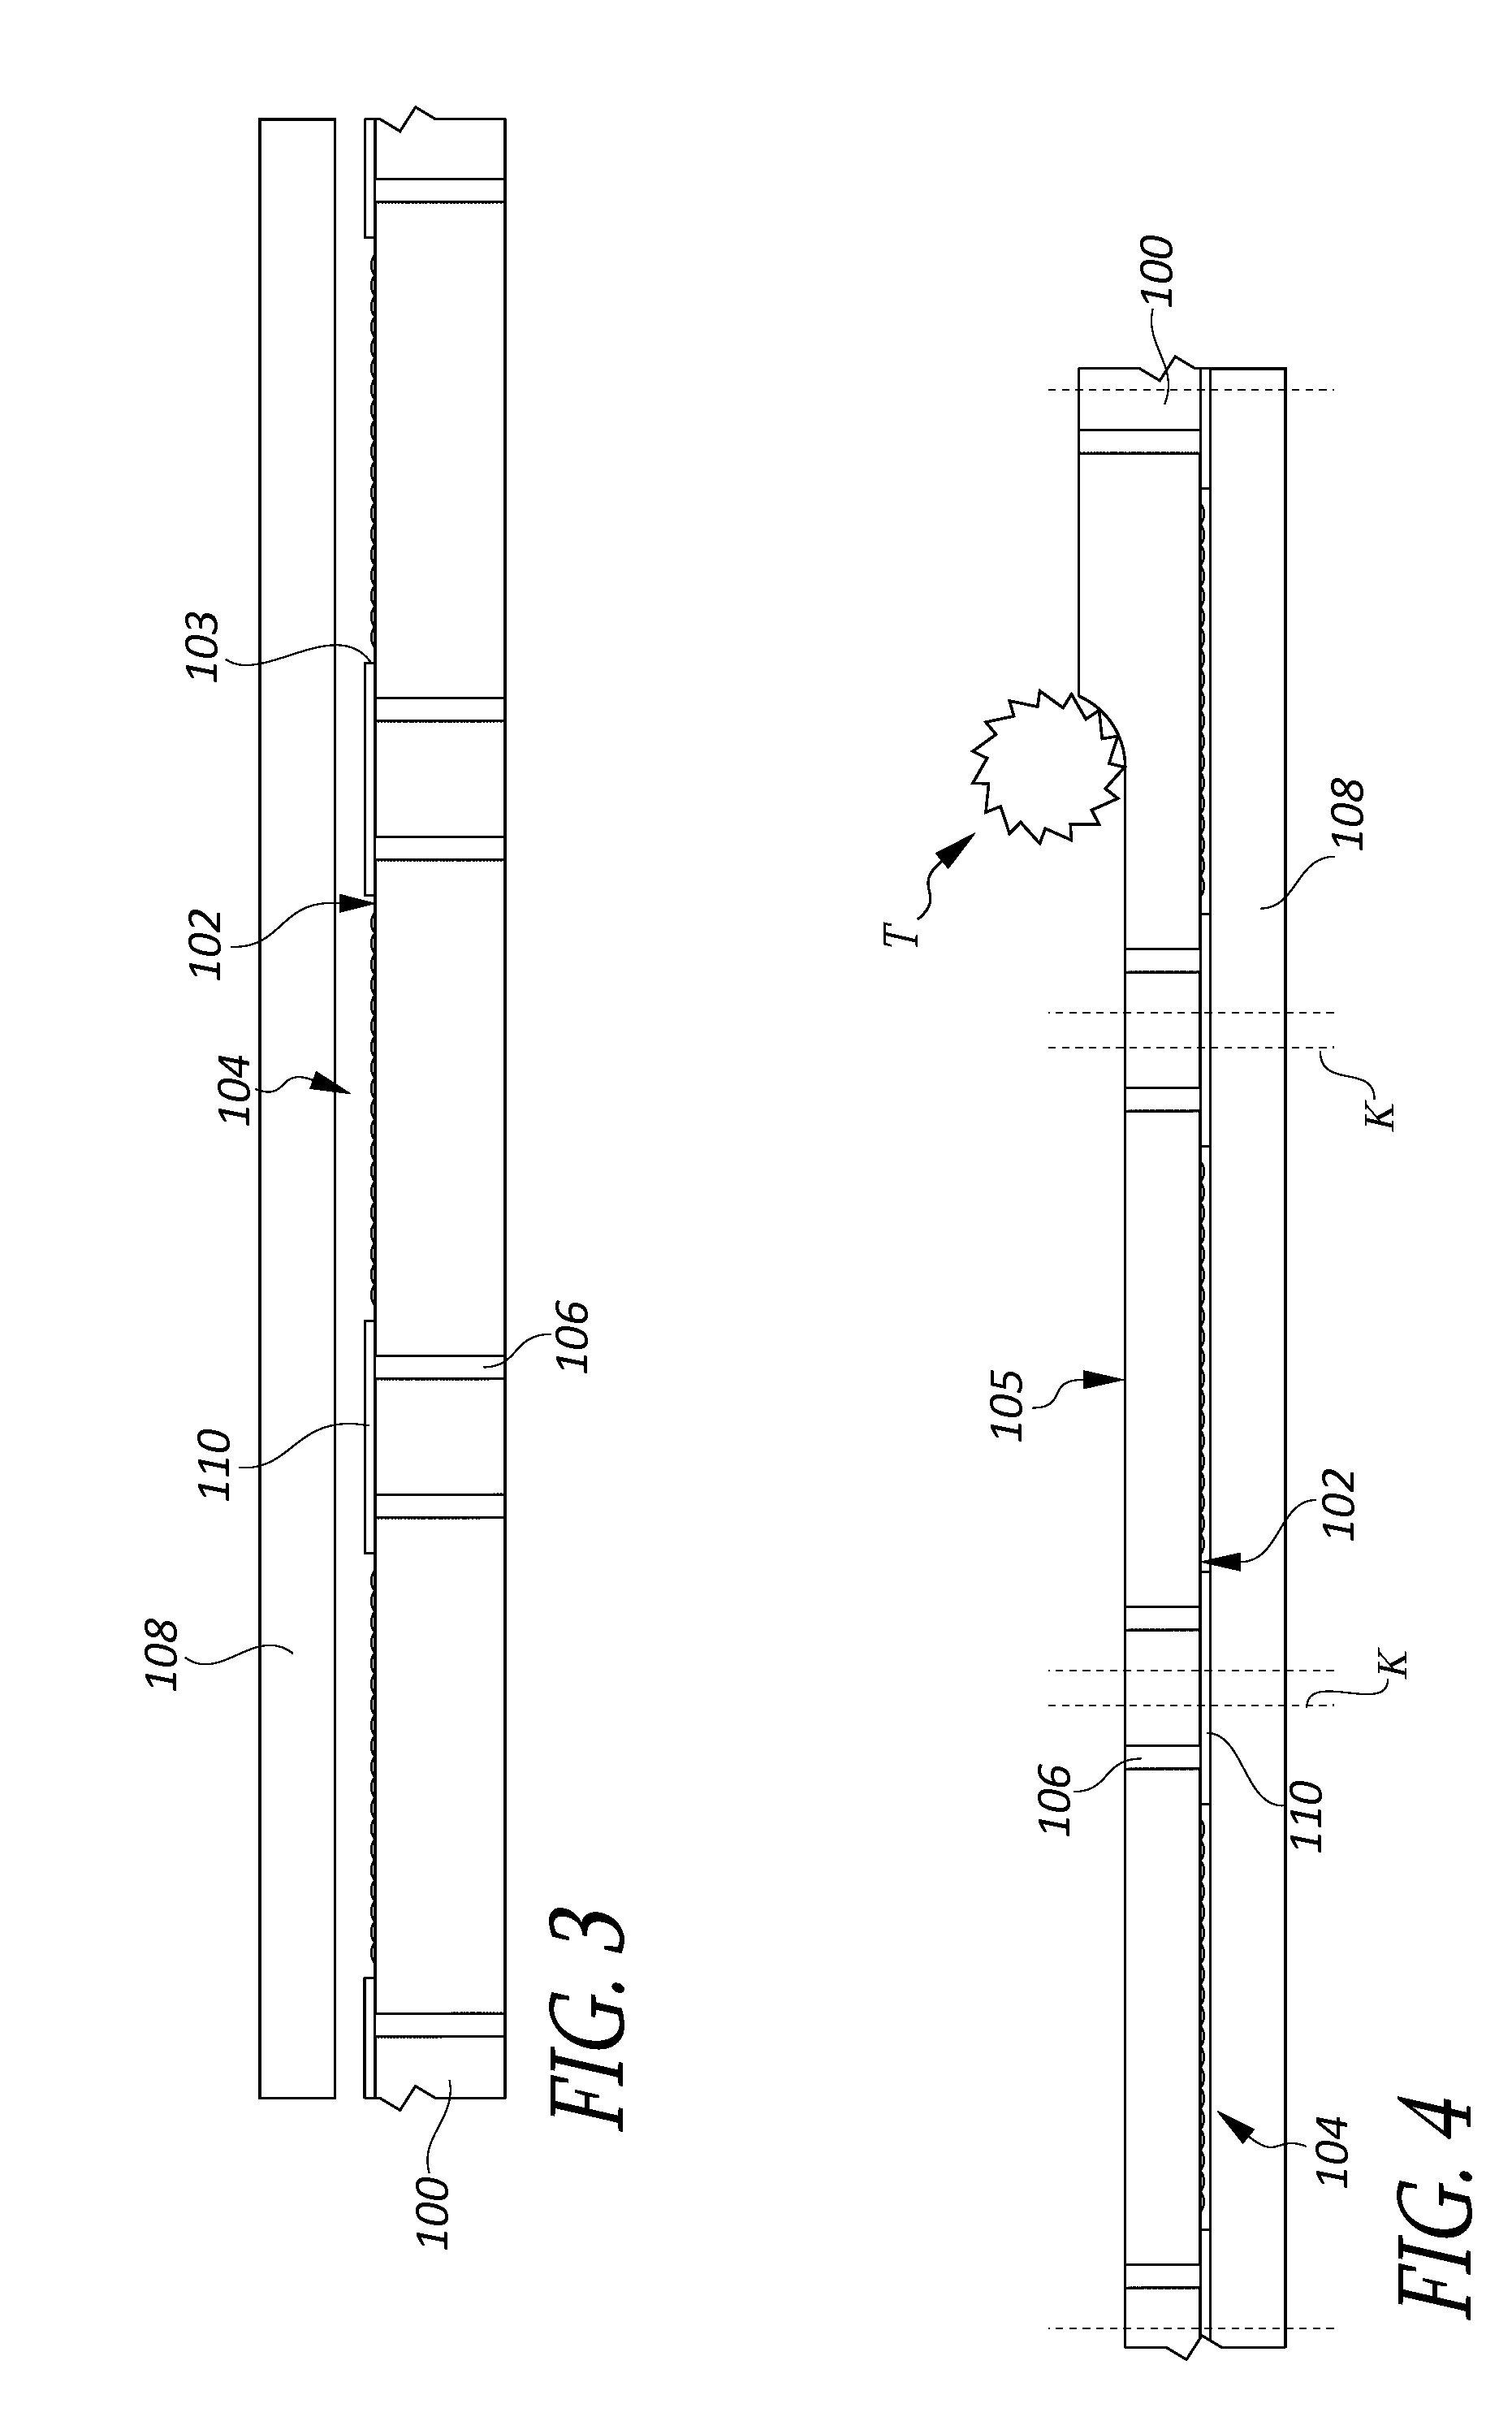 Wafer level optical sensor package and low profile camera module, and method of manufacture